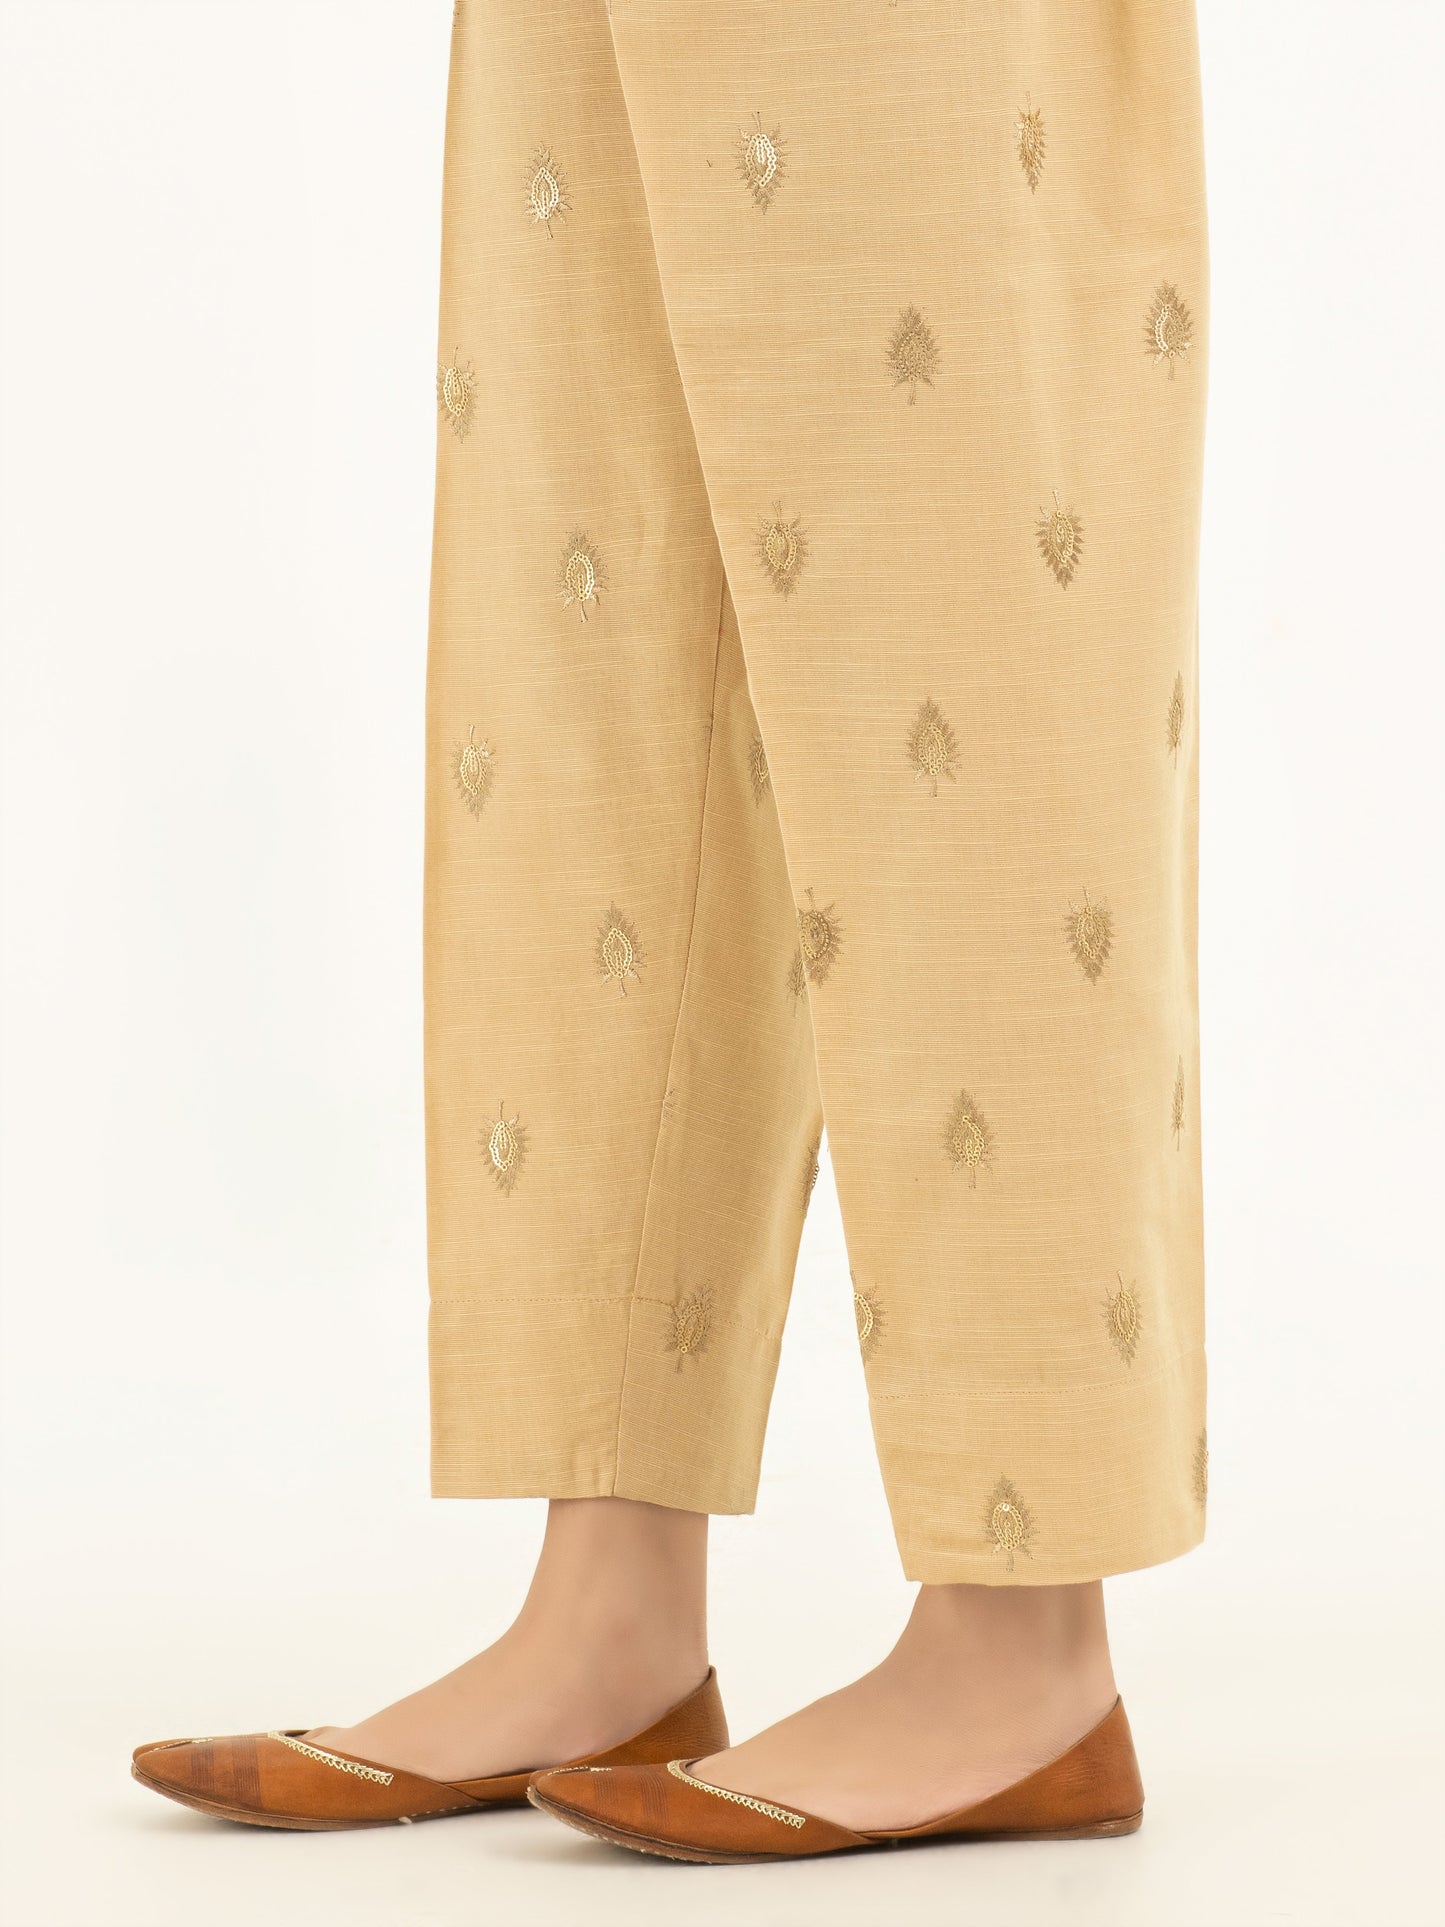 Embroidered Khaddar Trousers